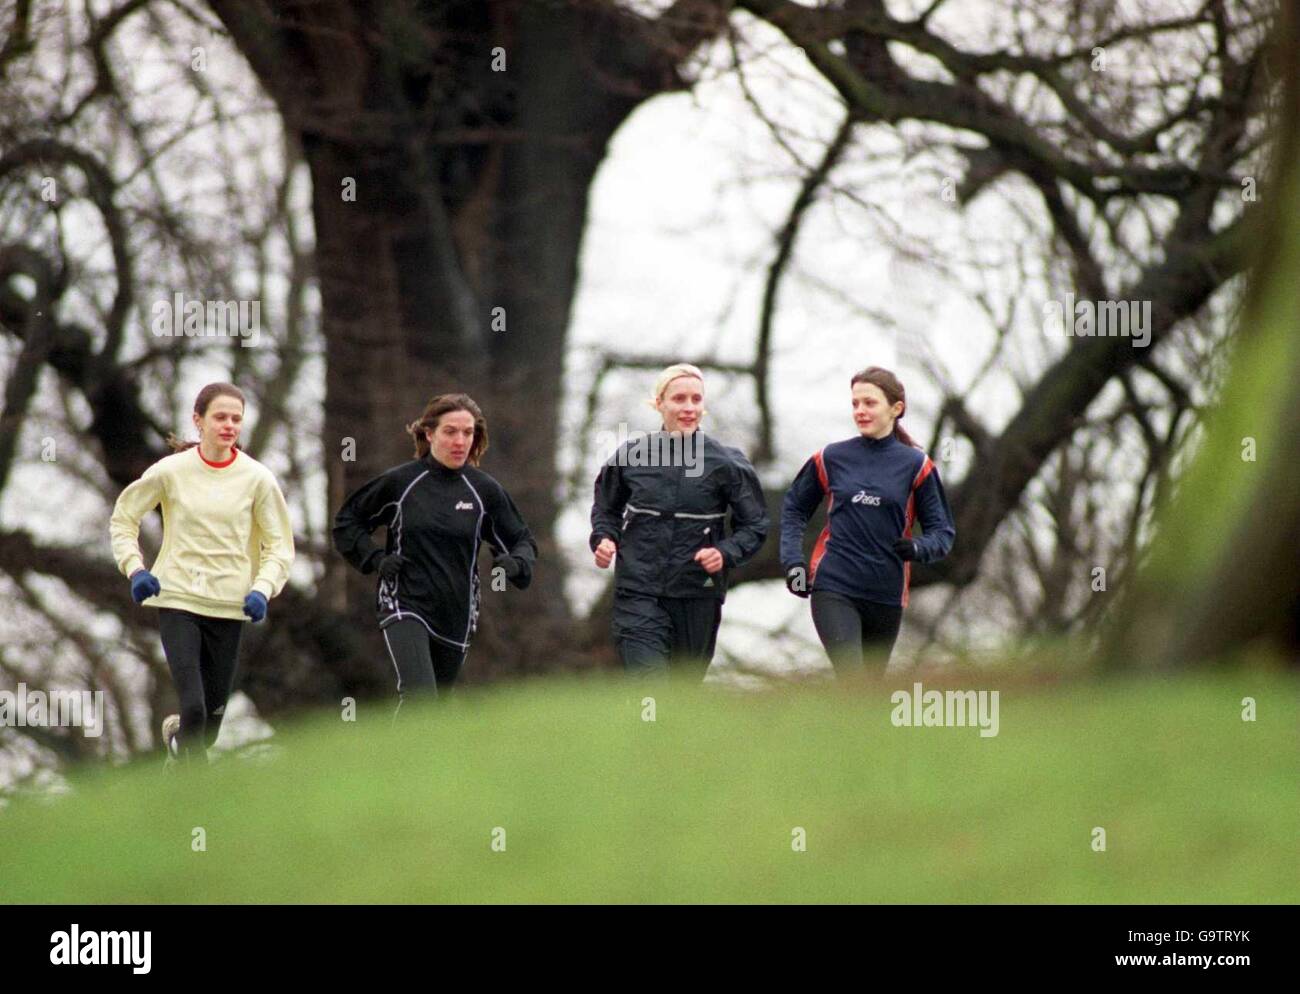 Athletics - Inter-Counties Cross Country Championships - Wollaton Park - Training Stock Photo